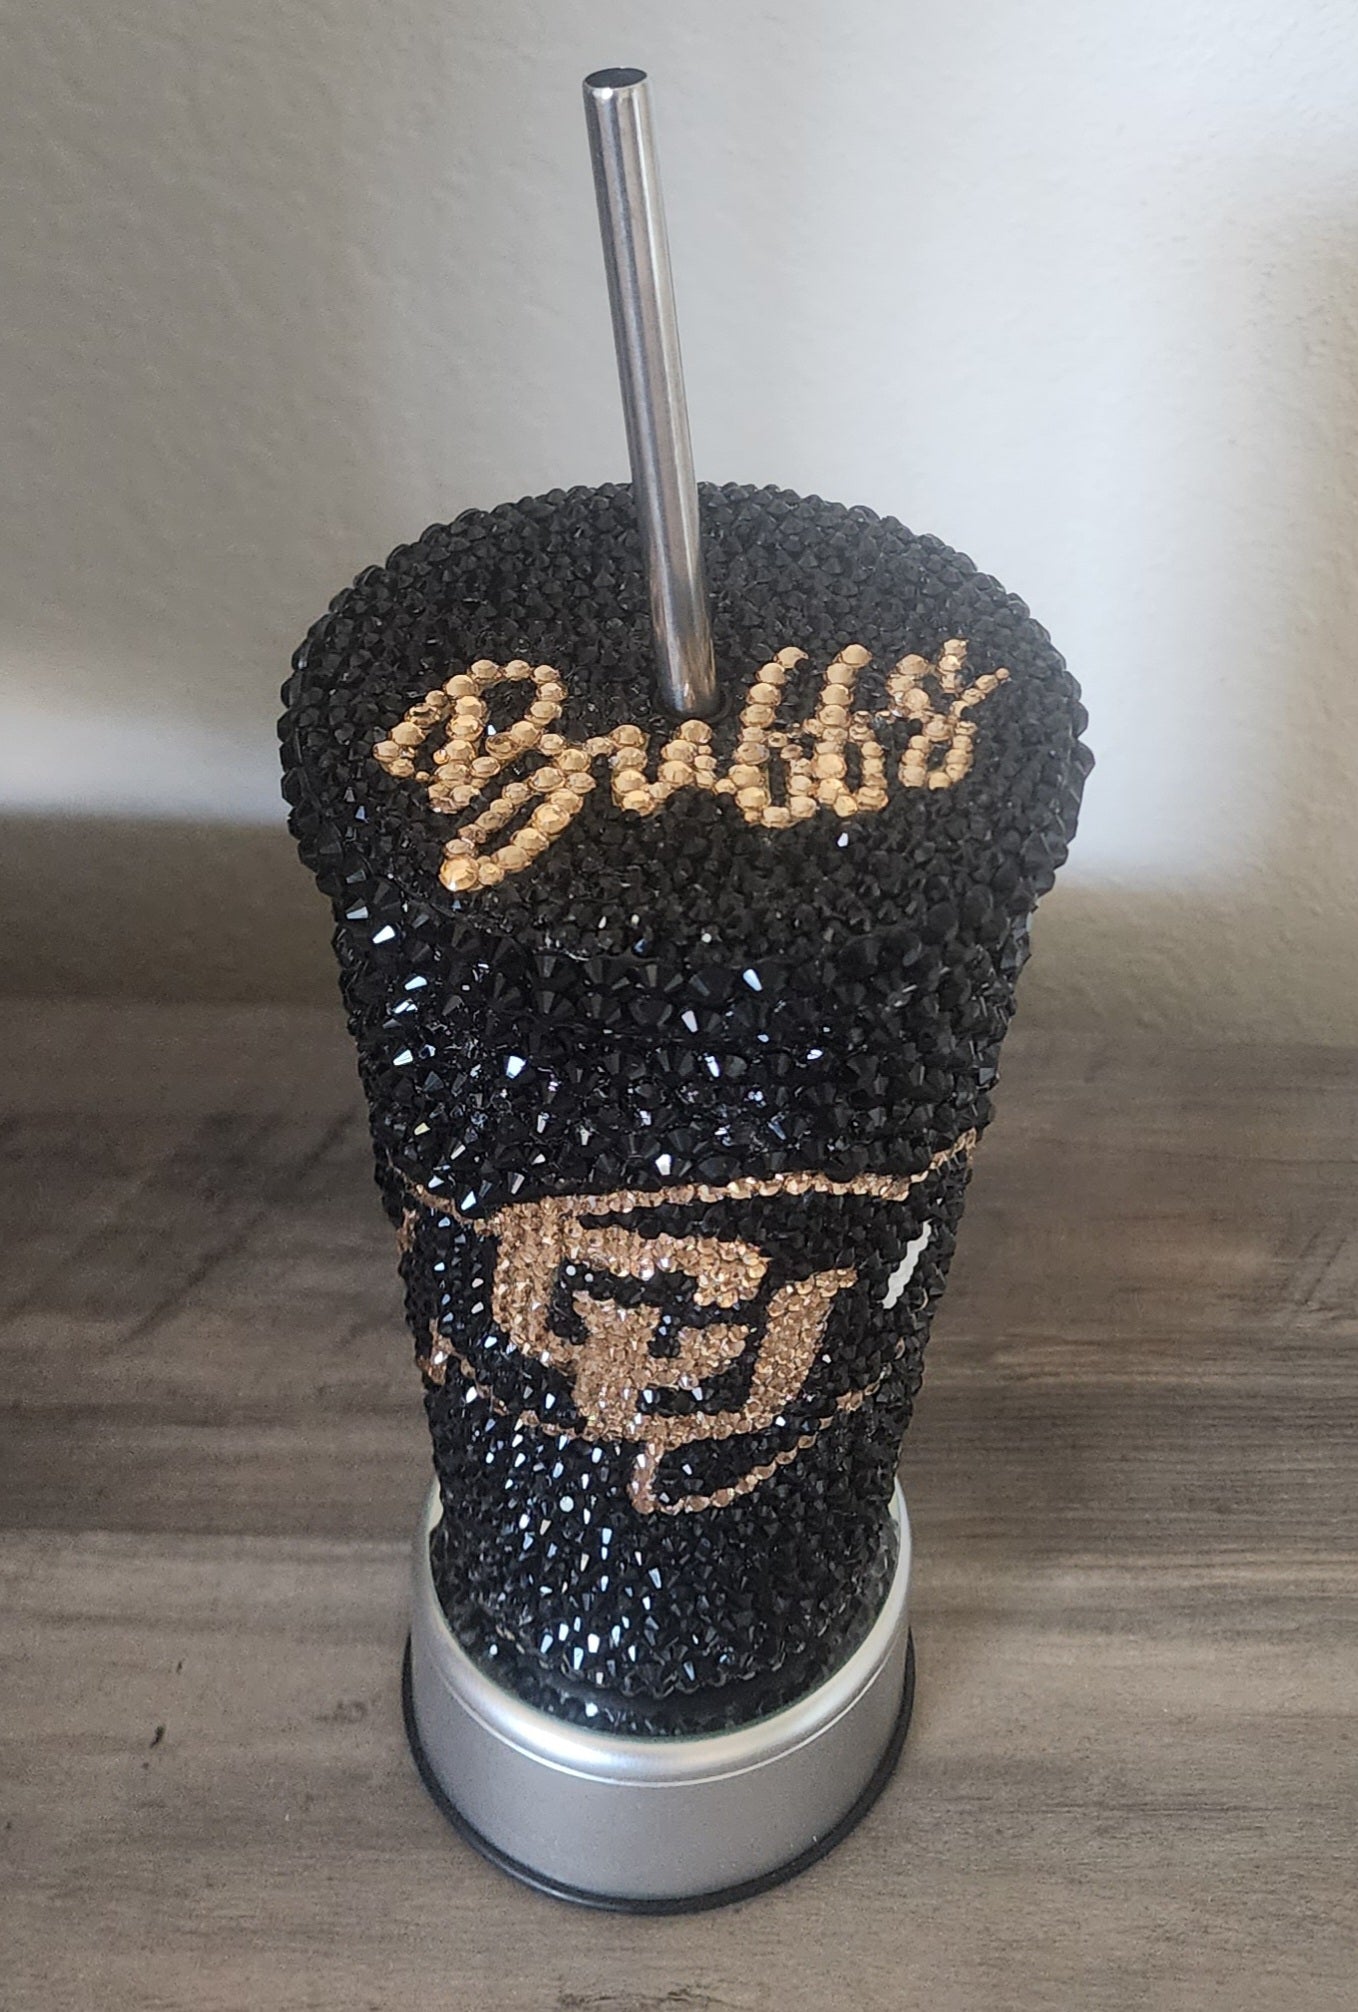 Colorado Buffs Rhinestone/Bling Personalized 19 oz Stainless Steel Tumbler with Straw